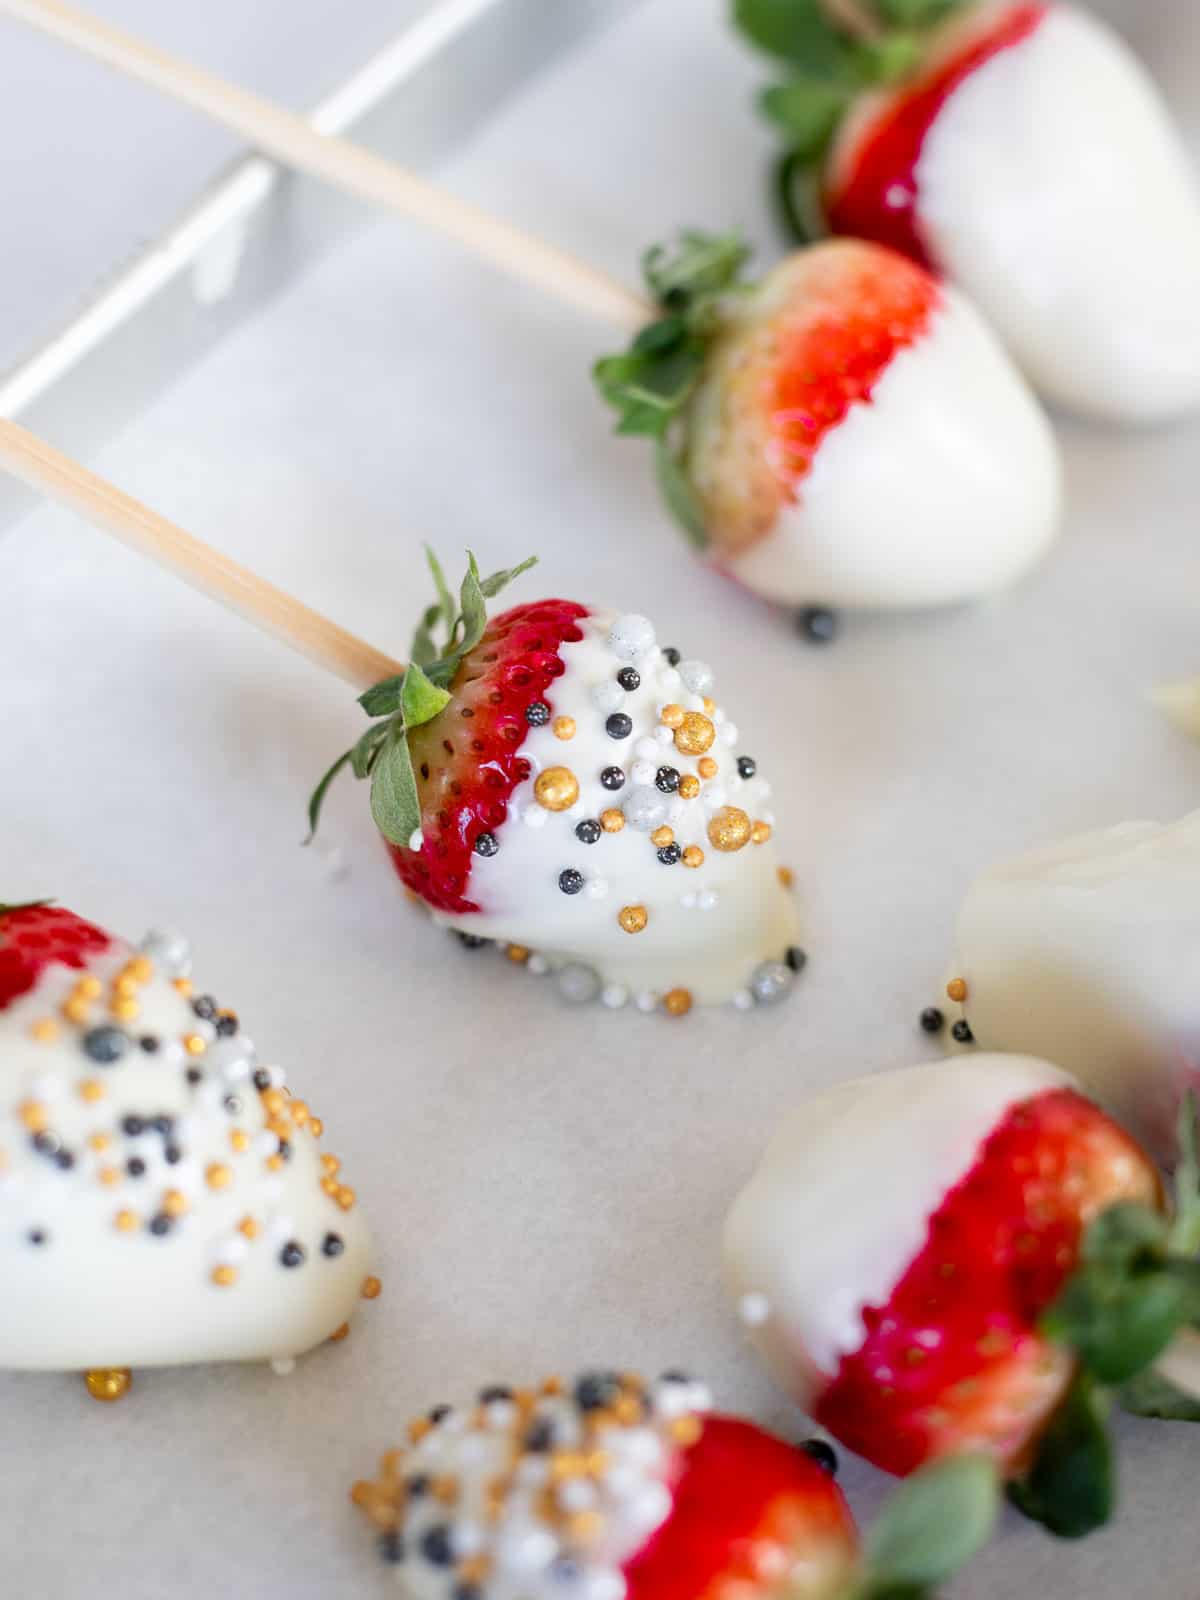 white chocolate strawberries decorated with sprinkles.